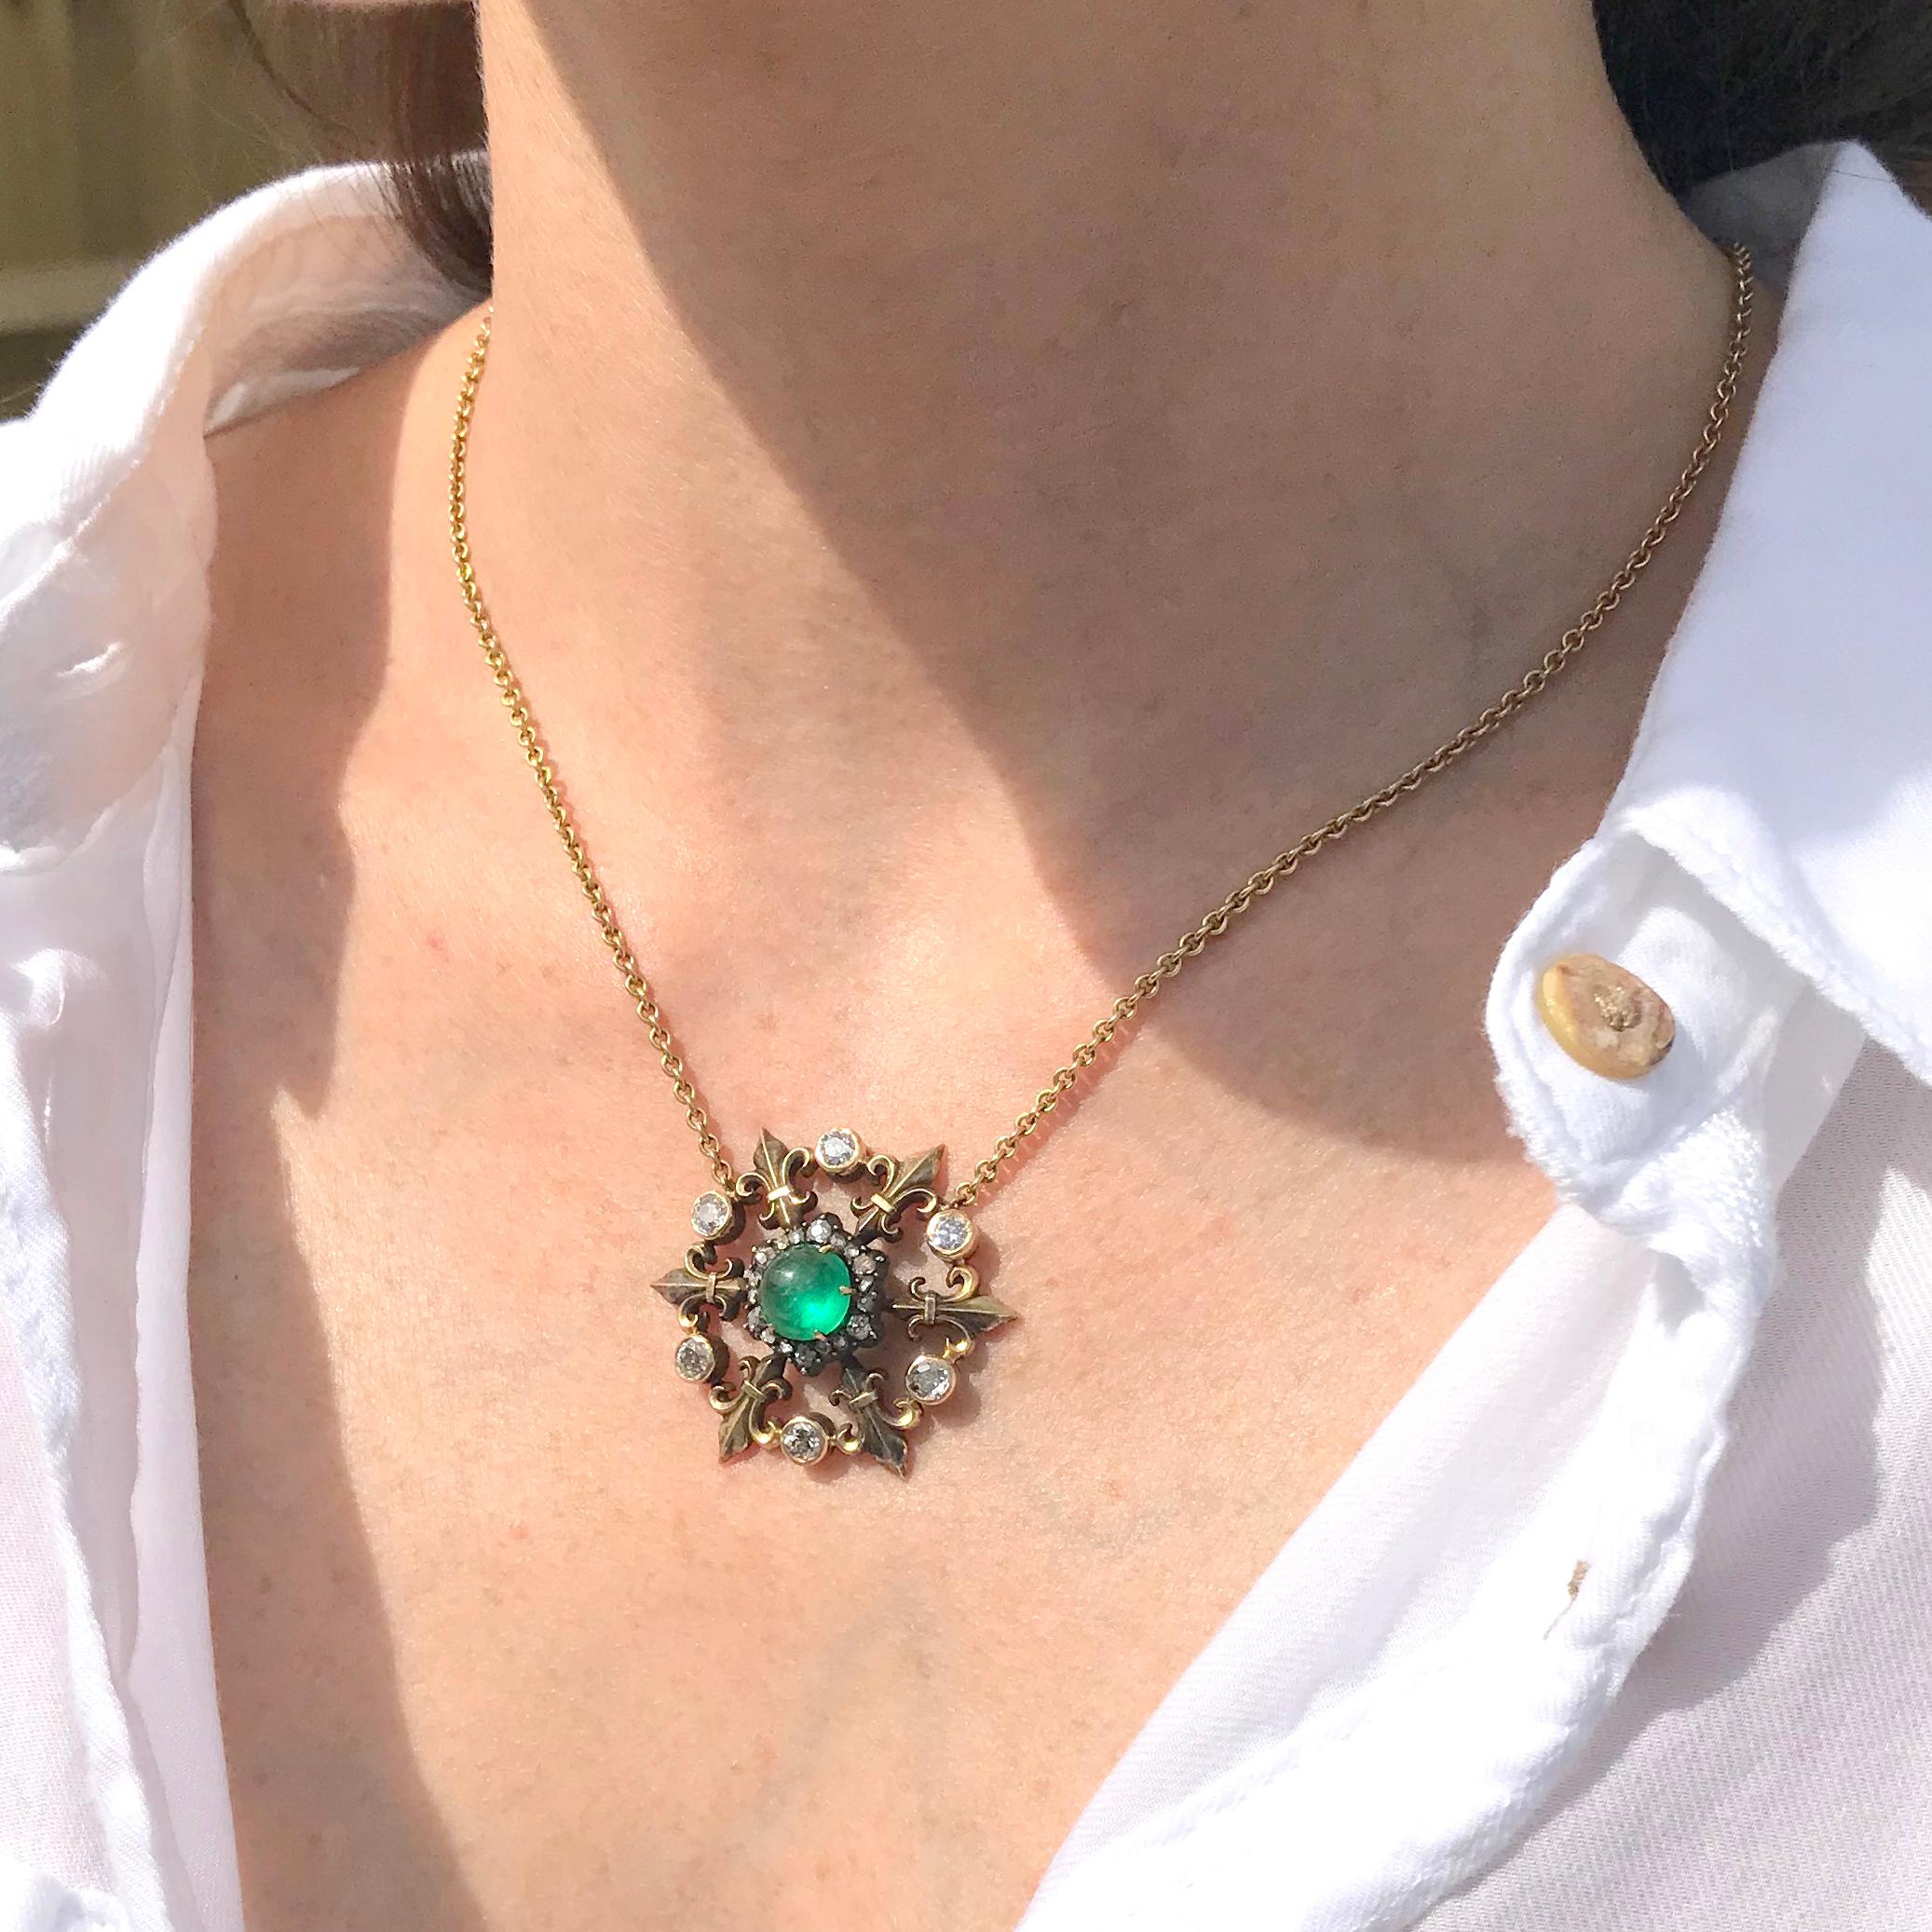 A supremely lovely Victorian emerald necklace. The central Colombian cabochon emerald is a bright, verdant green, the colour of which is highlighted by the border of white diamonds set in black, oxidised silver in the surround. Six beautifully